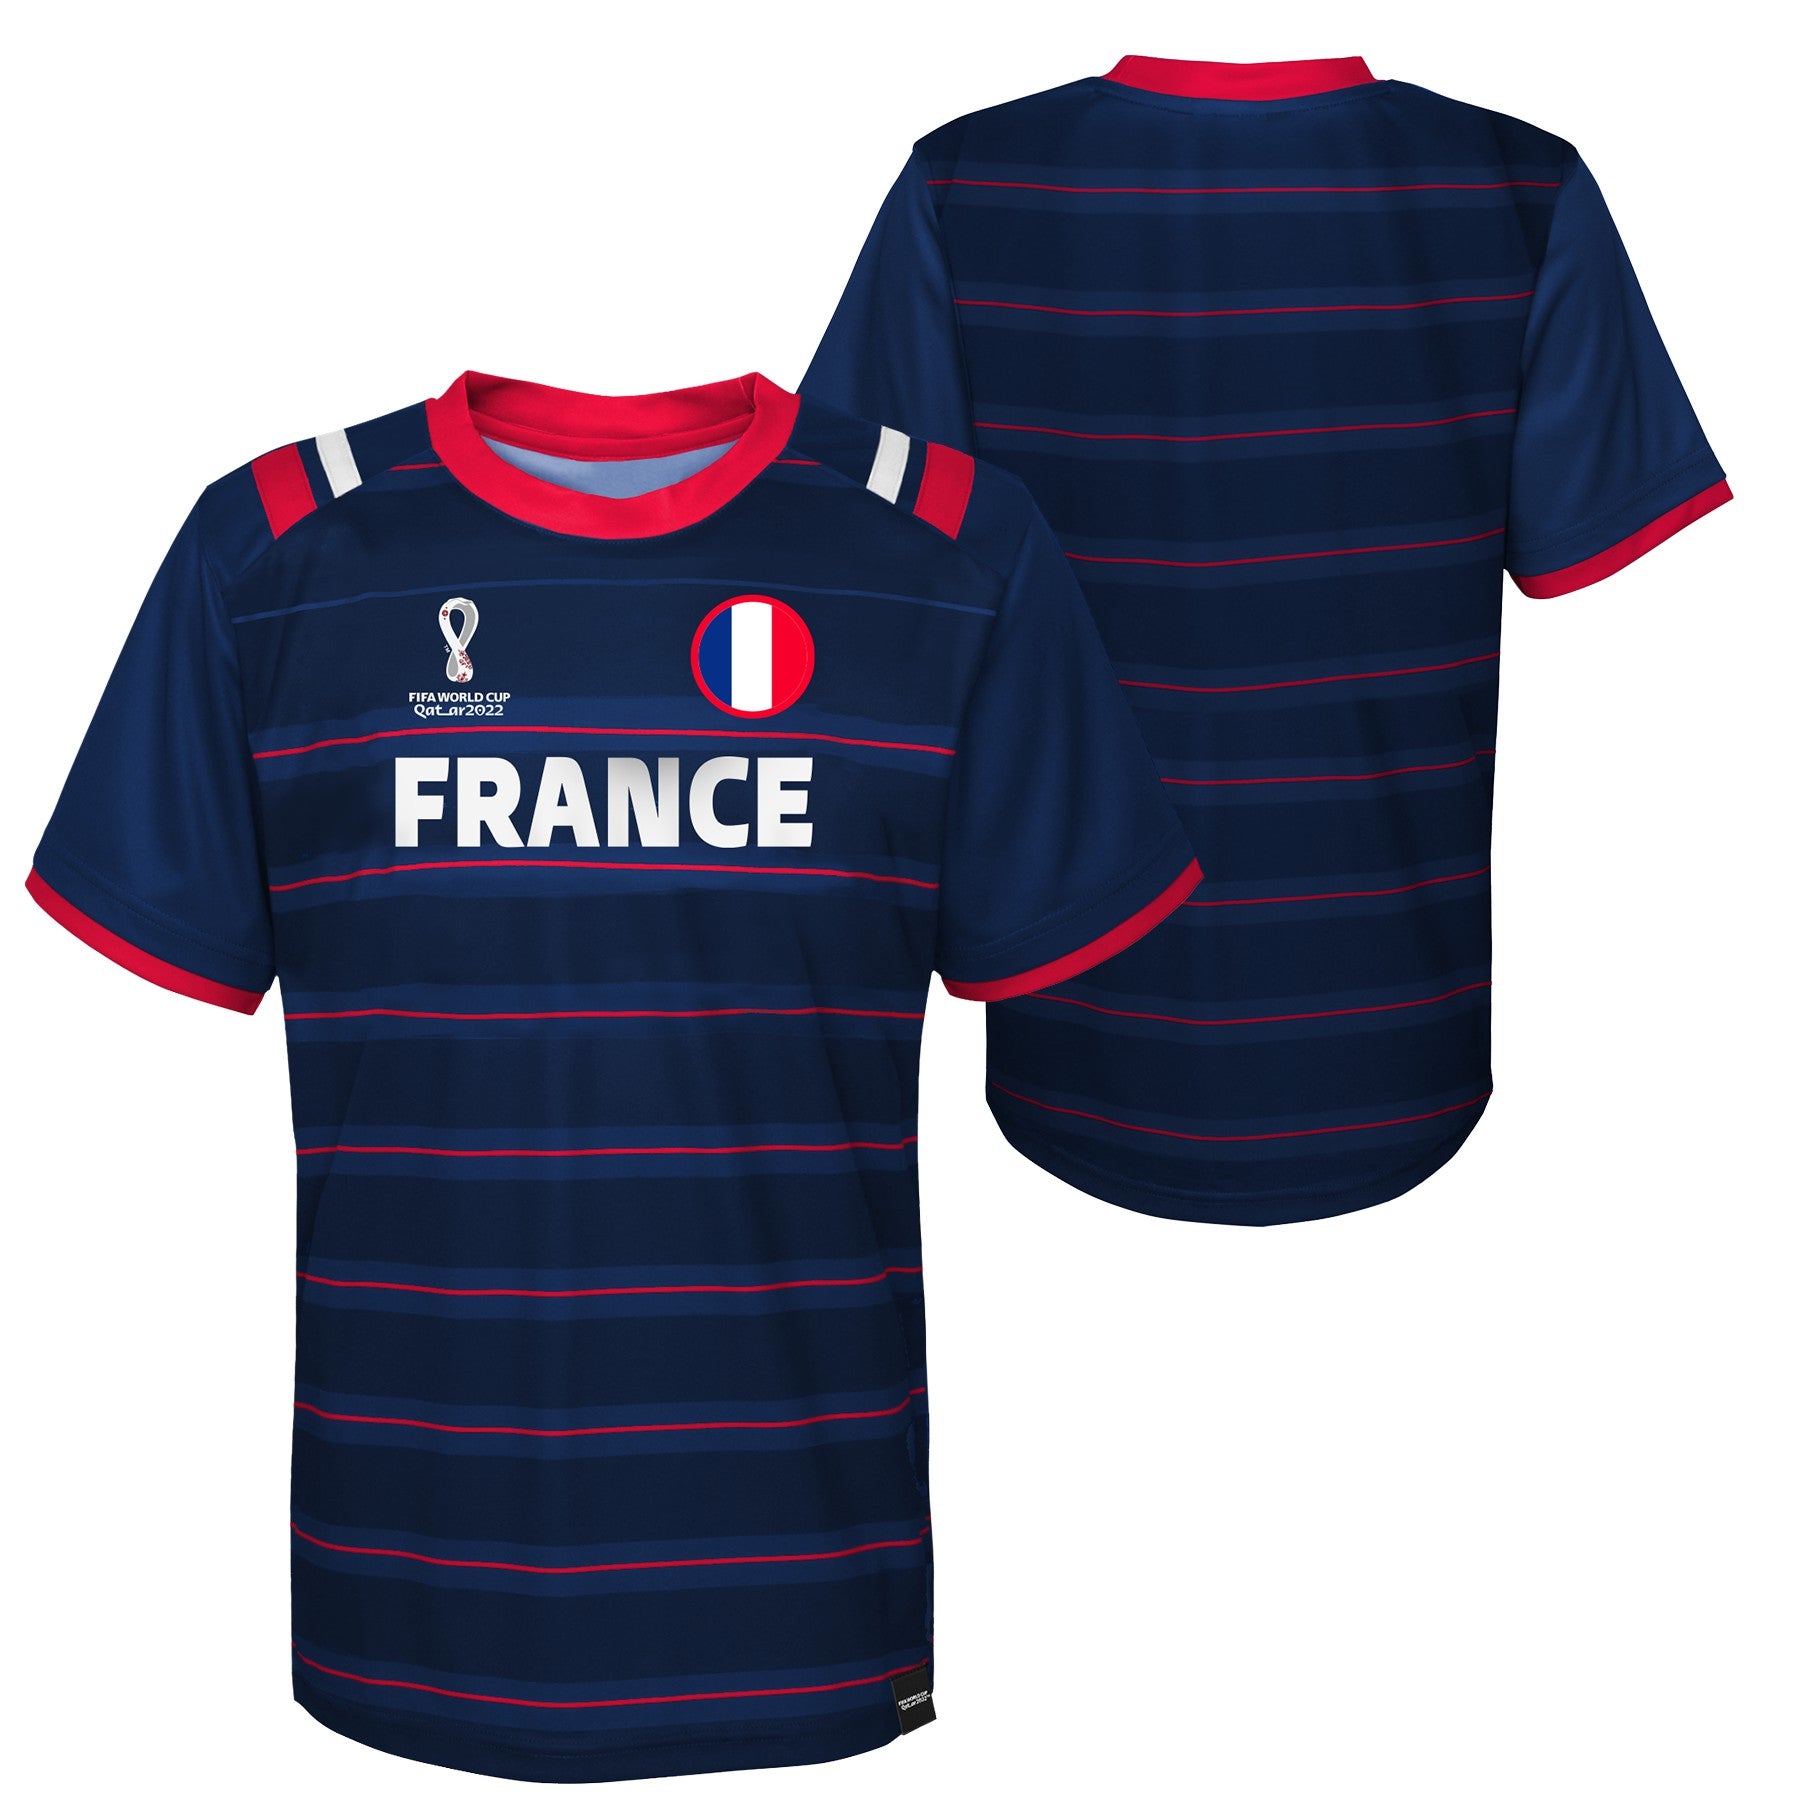 France FIFA World Cup Official Jersey Qatar 2022